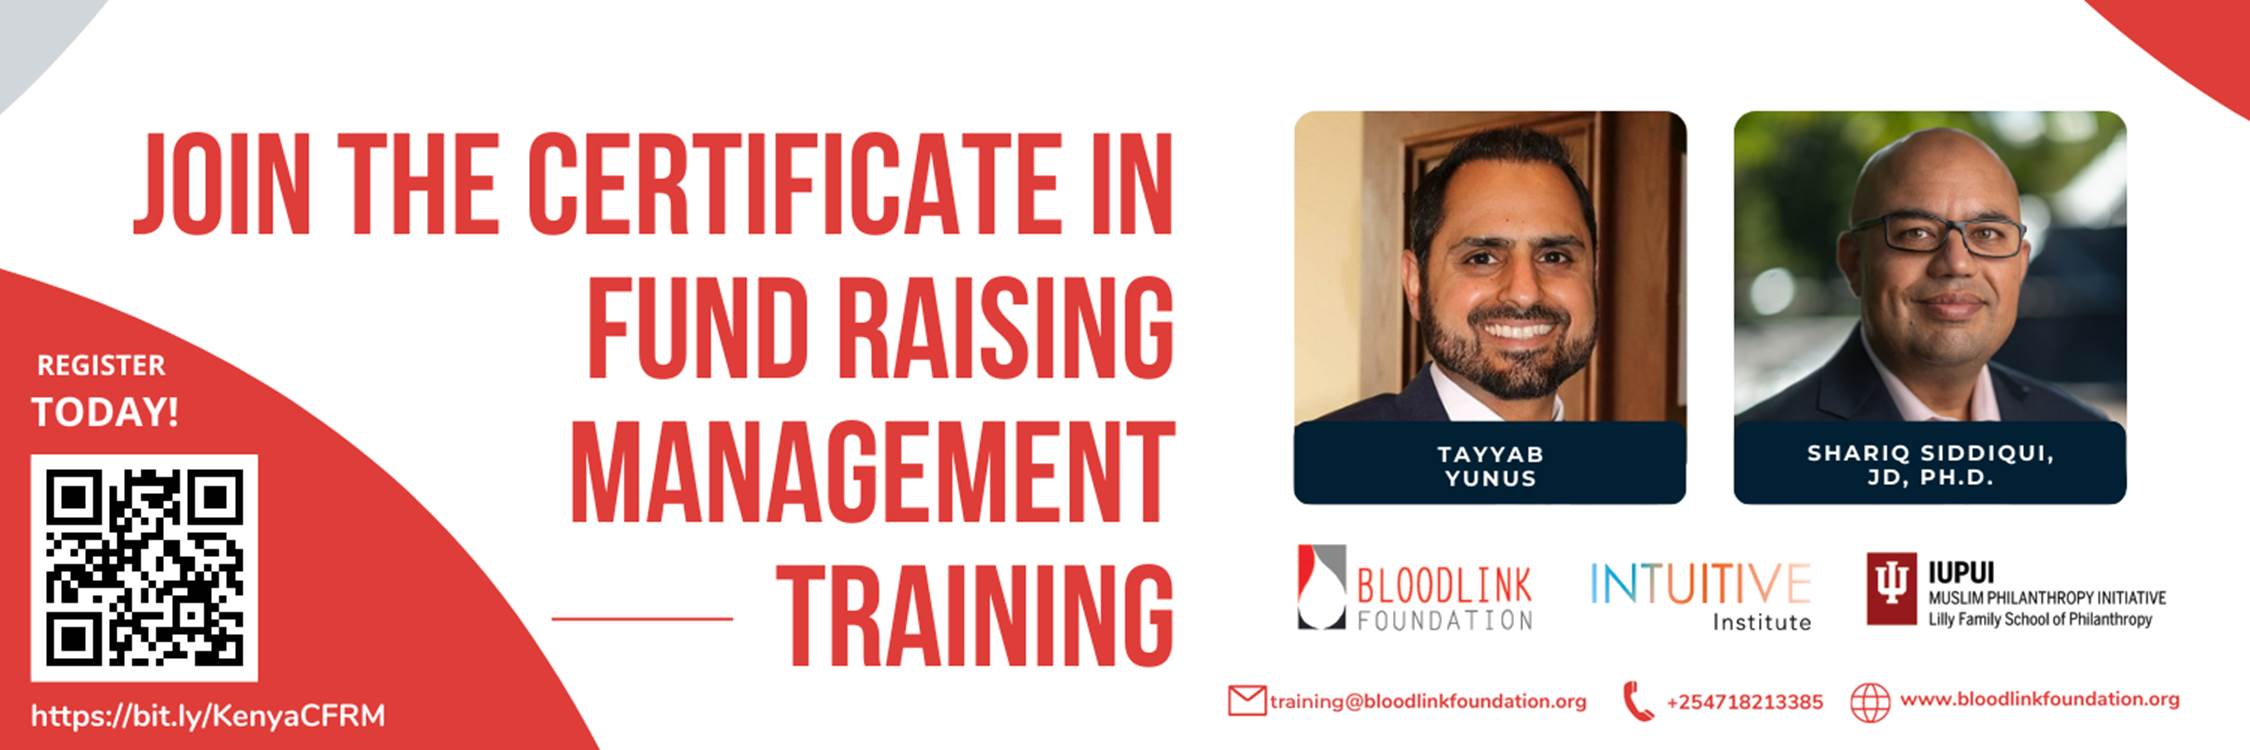 join-the-certificate-in-fundraising-management-training